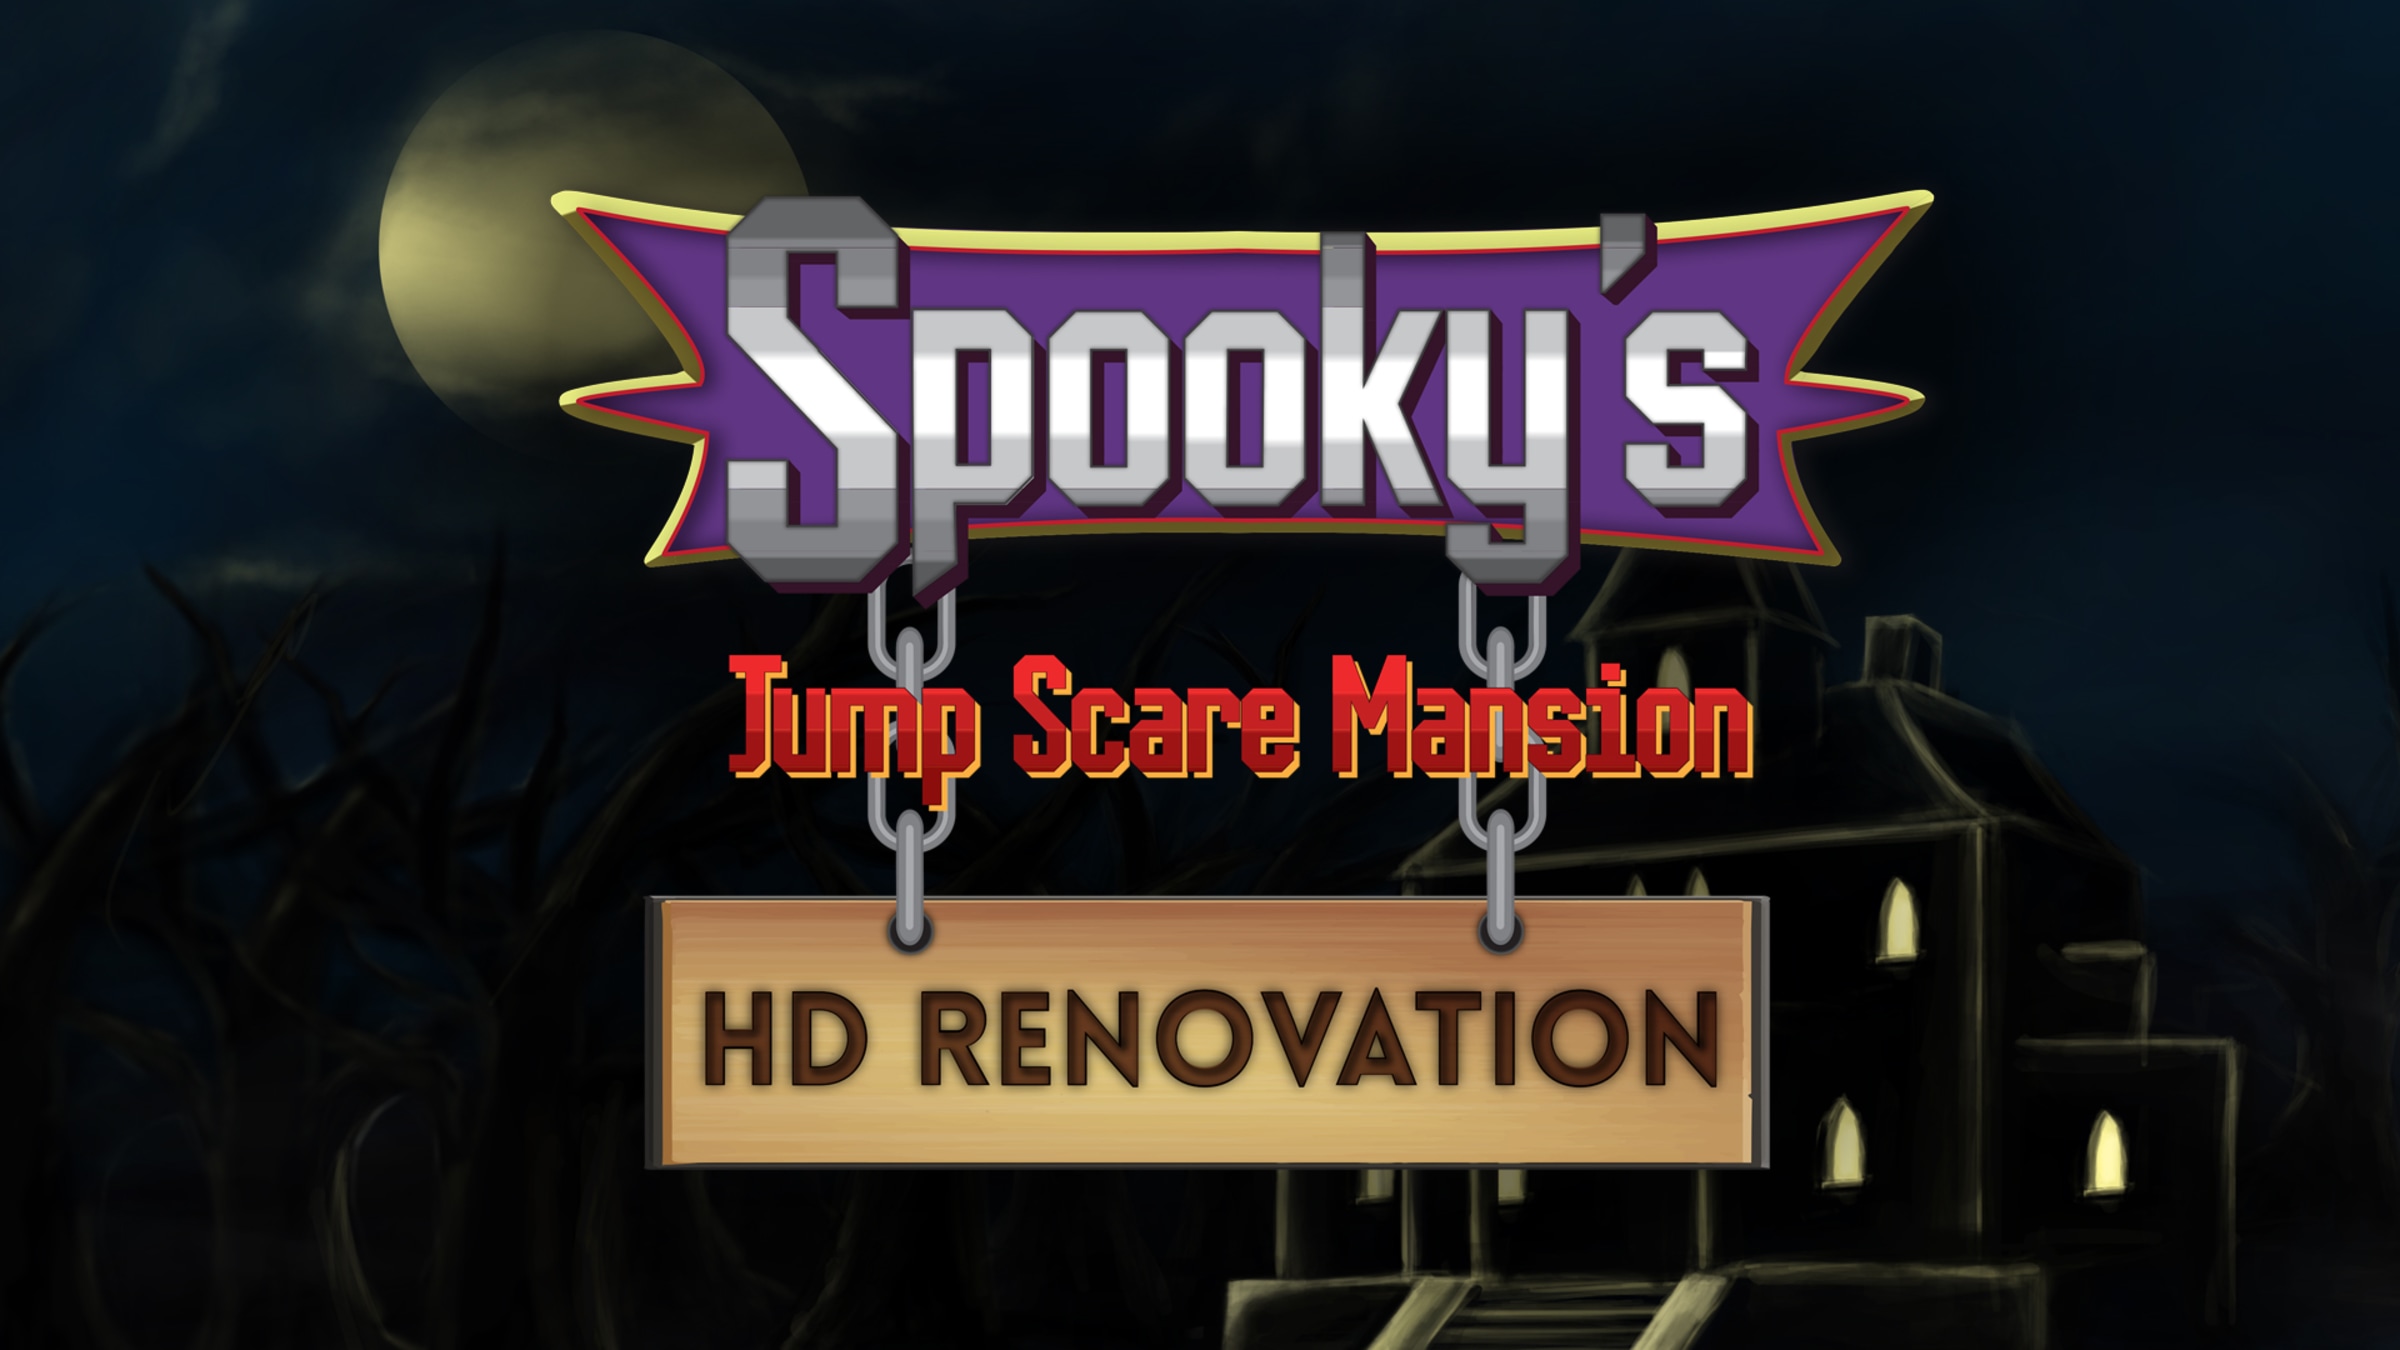 Spooky jumpscare mansion